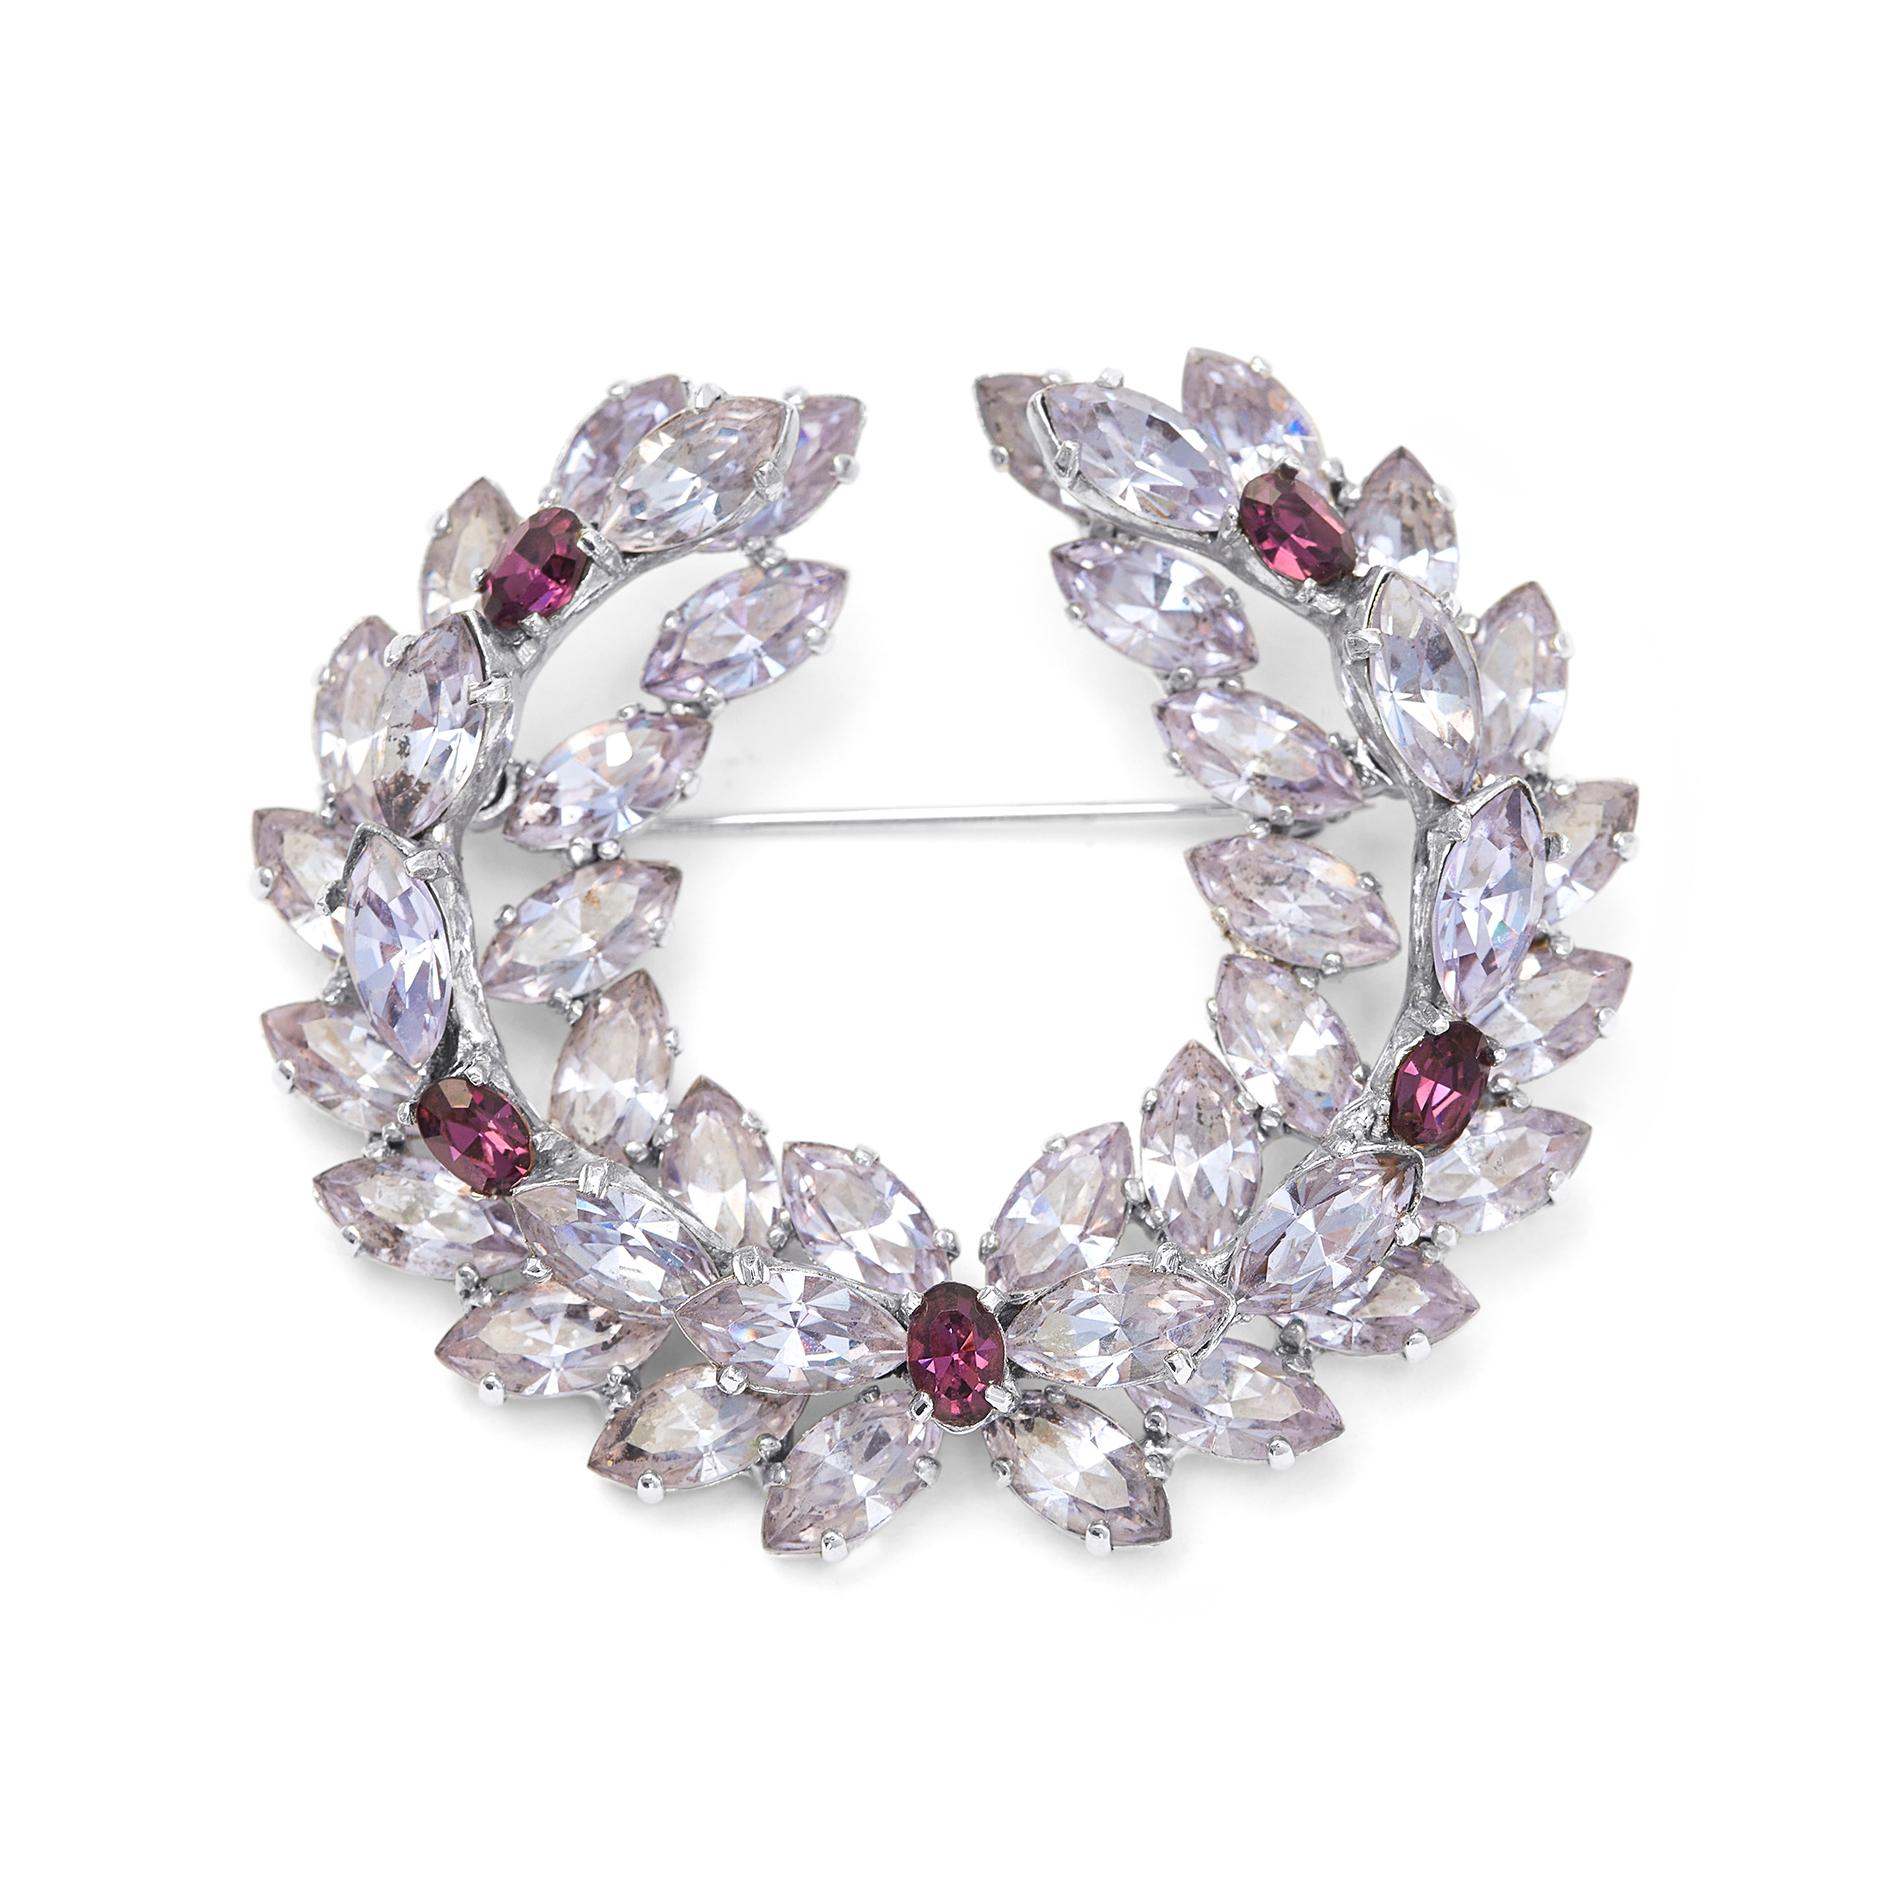 1950s Christian Dior by Mitchel Maer wreath brooch and clip earrings set featuring gradients of amethyst and rhodolite marquis and oval rhinestones and set in rhodium-plating.  The brooch and earrings have a stacked 3 dimensional design.  Both